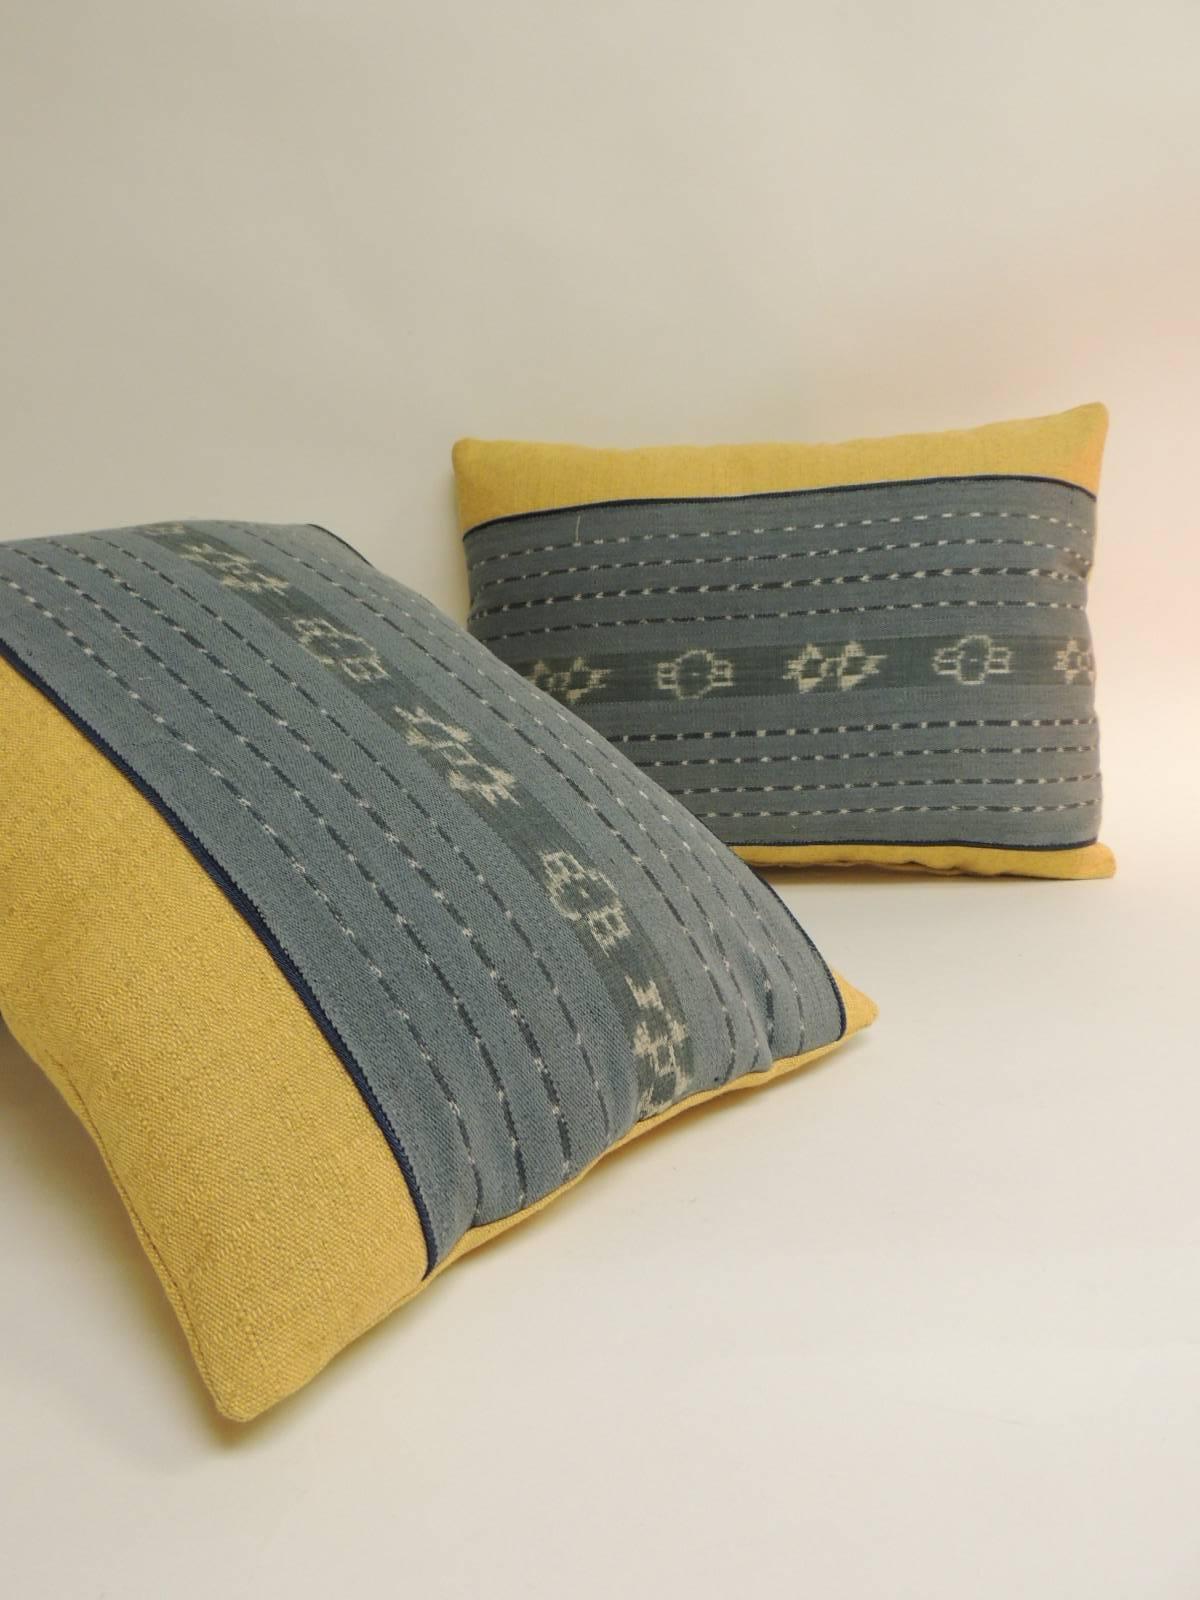 Bhutanese Pair of Vintage Blue and Yellow Woven Ikat Bolster Decorative Pillows